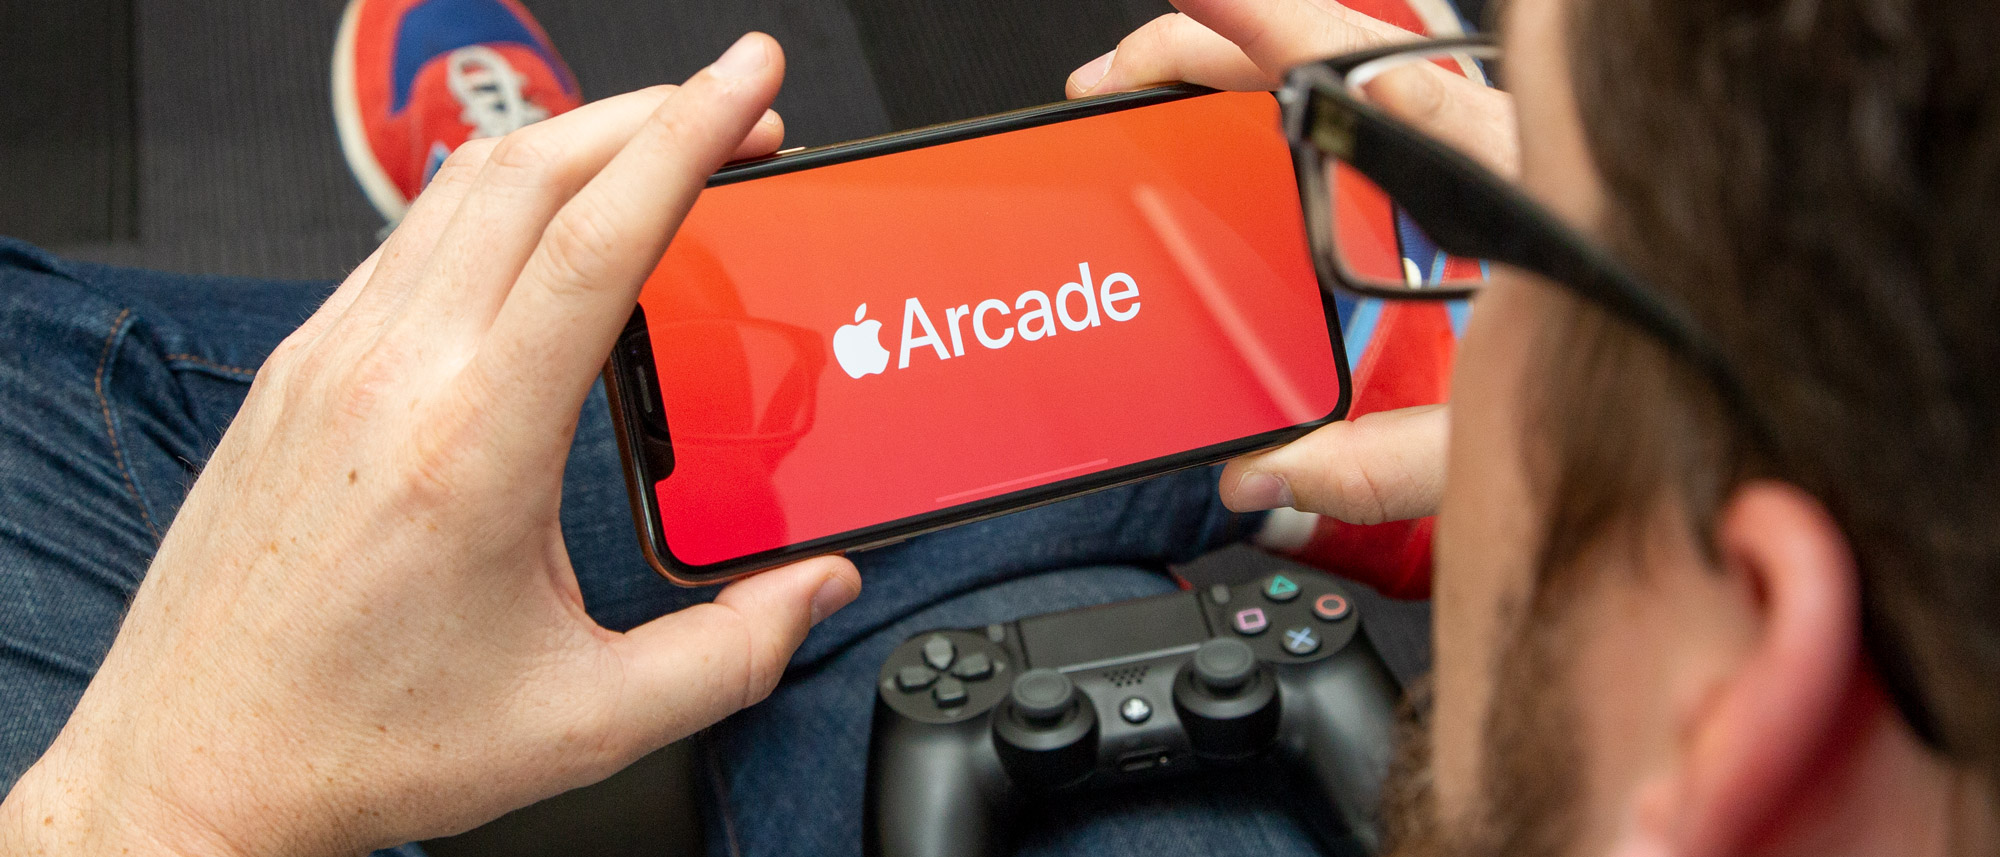 What Is Apple Arcade And How Does It Work?